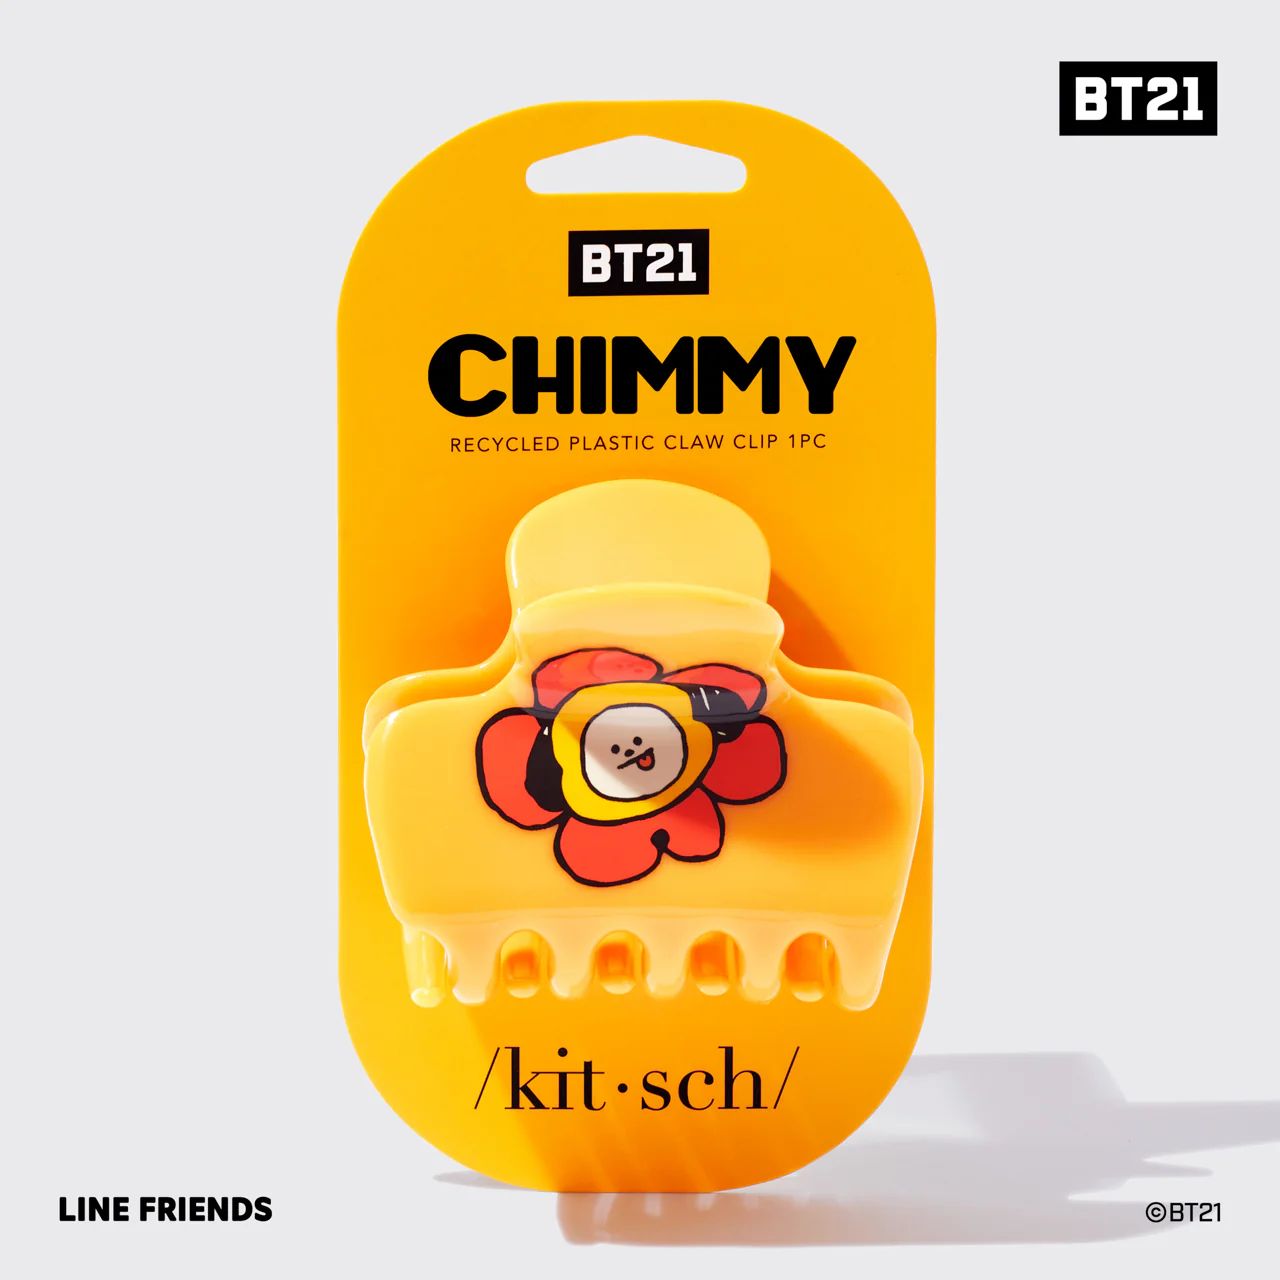 BT21 meets Kitsch Recycled Plastic Puffy Claw Clip 1pc - CHIMMY | Kitsch